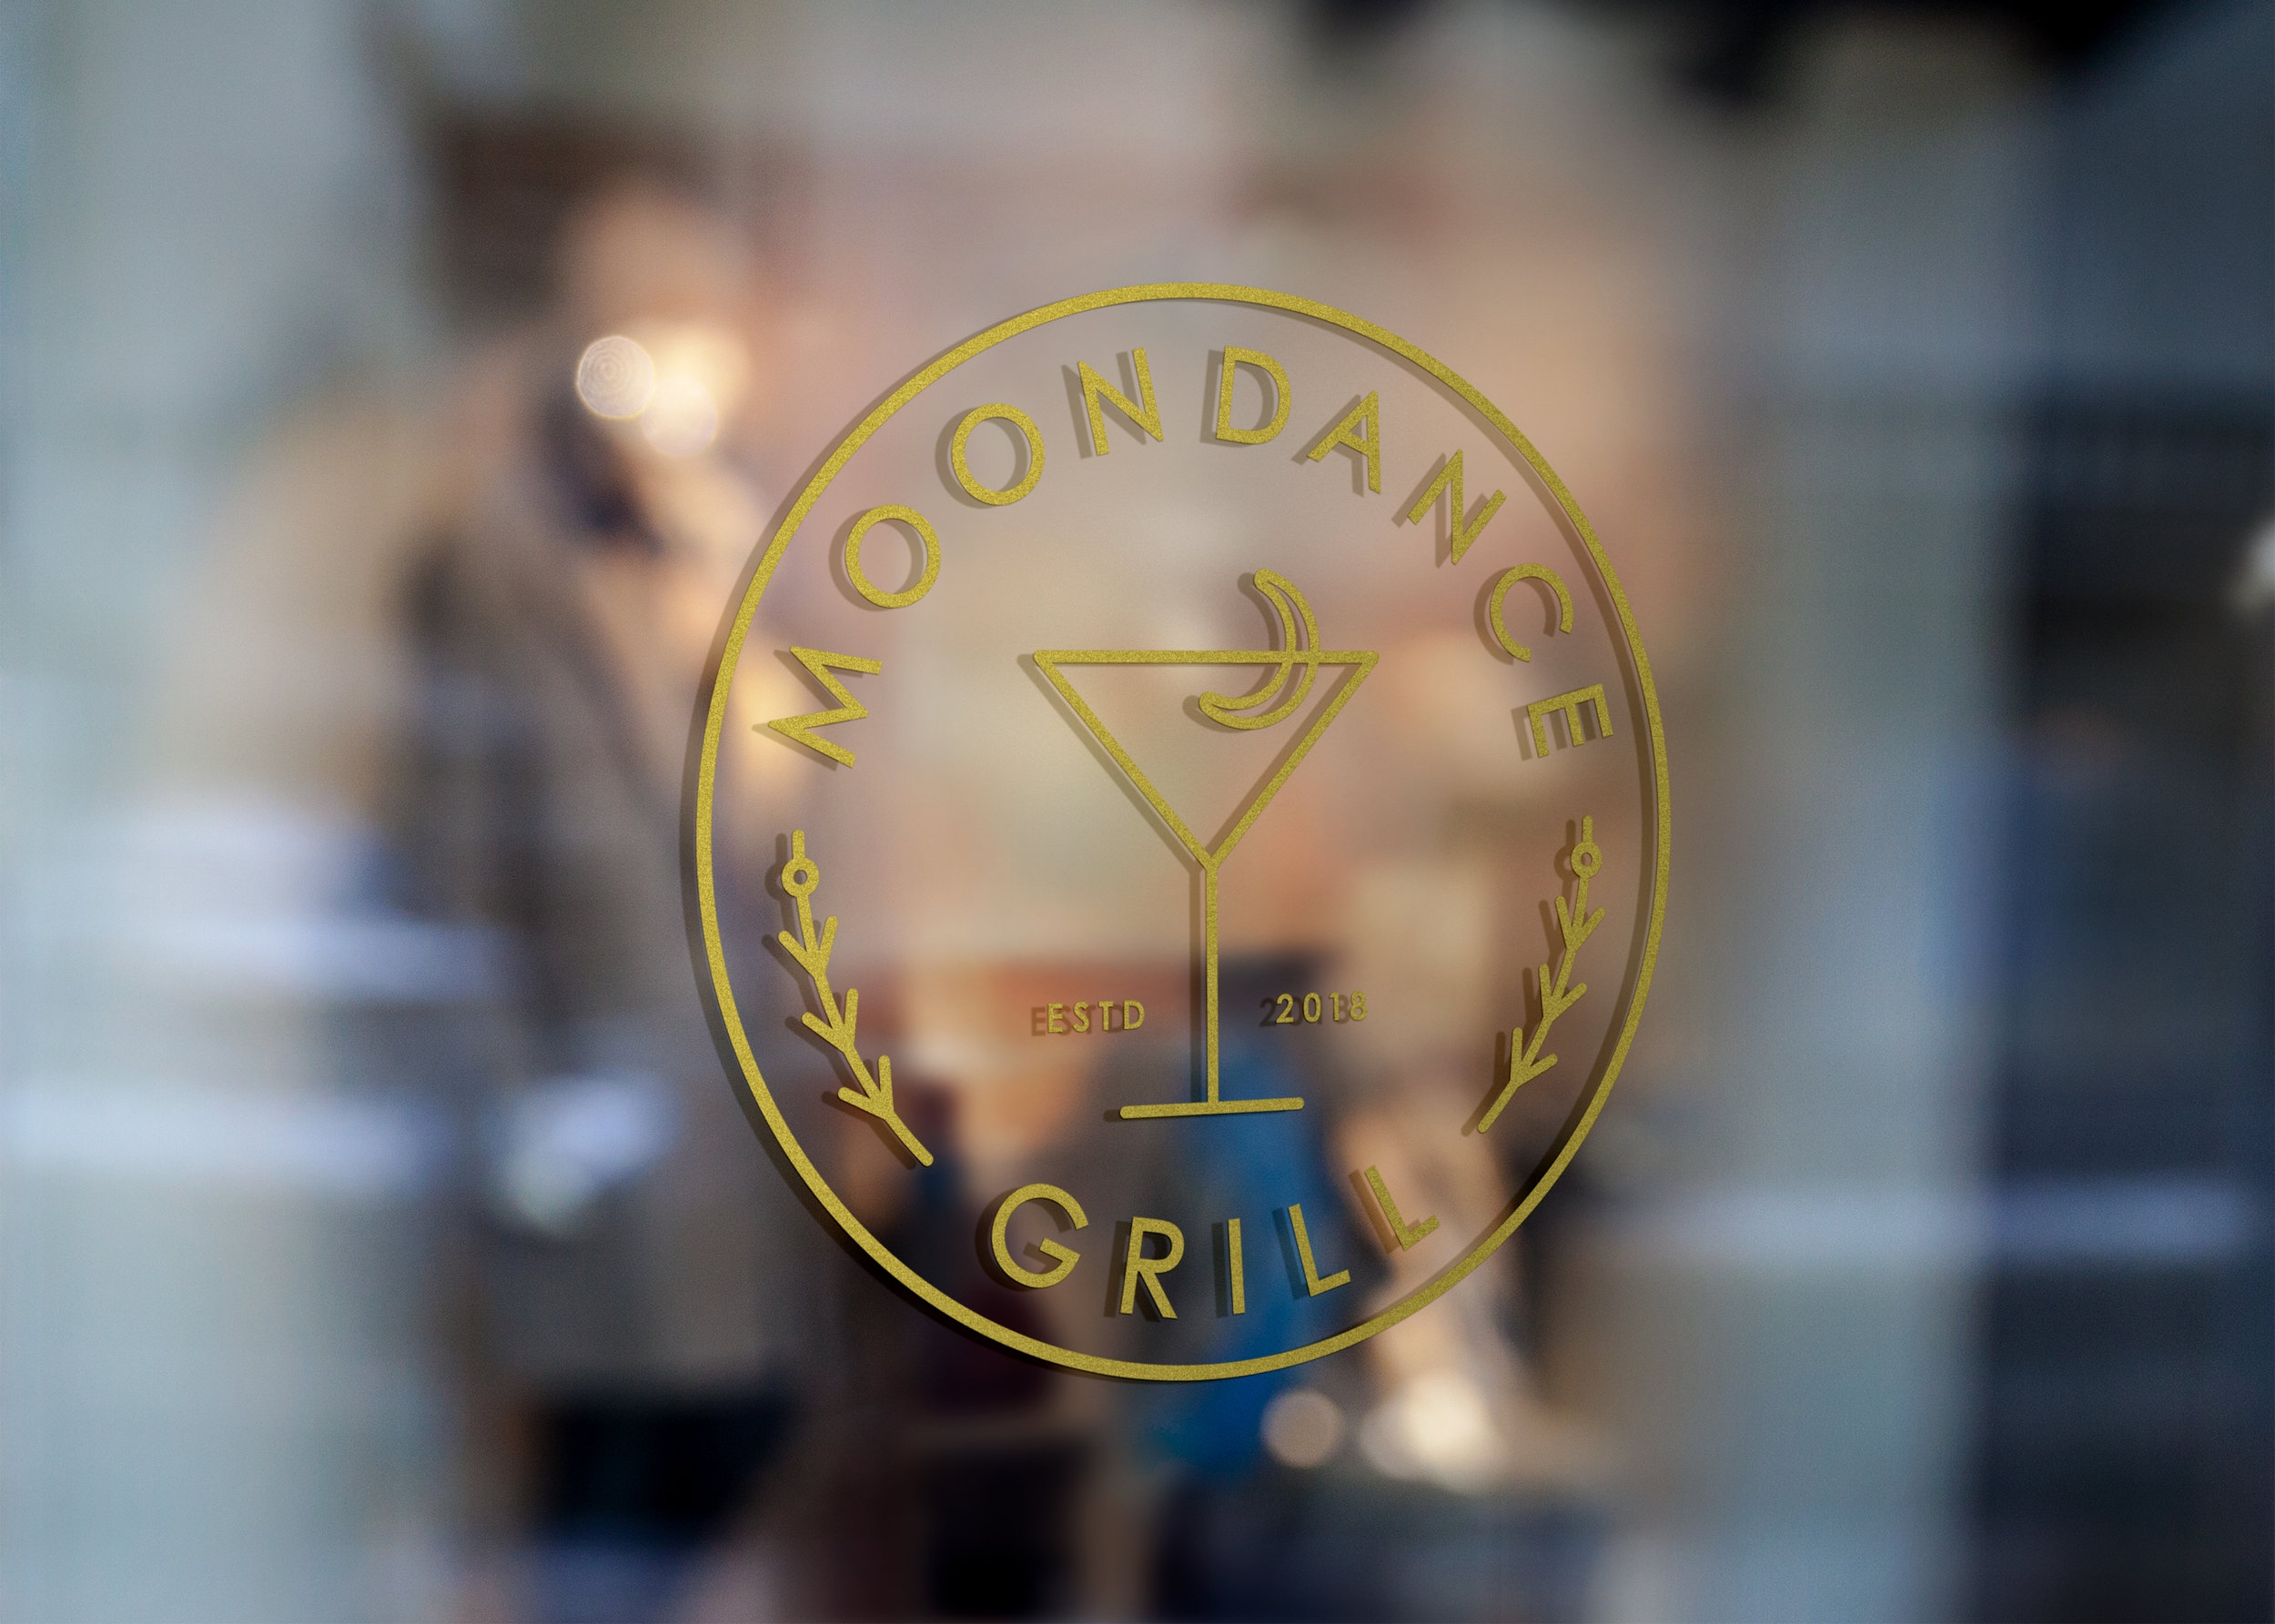  Moondance Grill Germantown Thornwood Prototype Entrance Logo  for Tommy Peters, Beale Street Blues Company Memphis  Name development, branding creative and design by Chuck Mitchell 